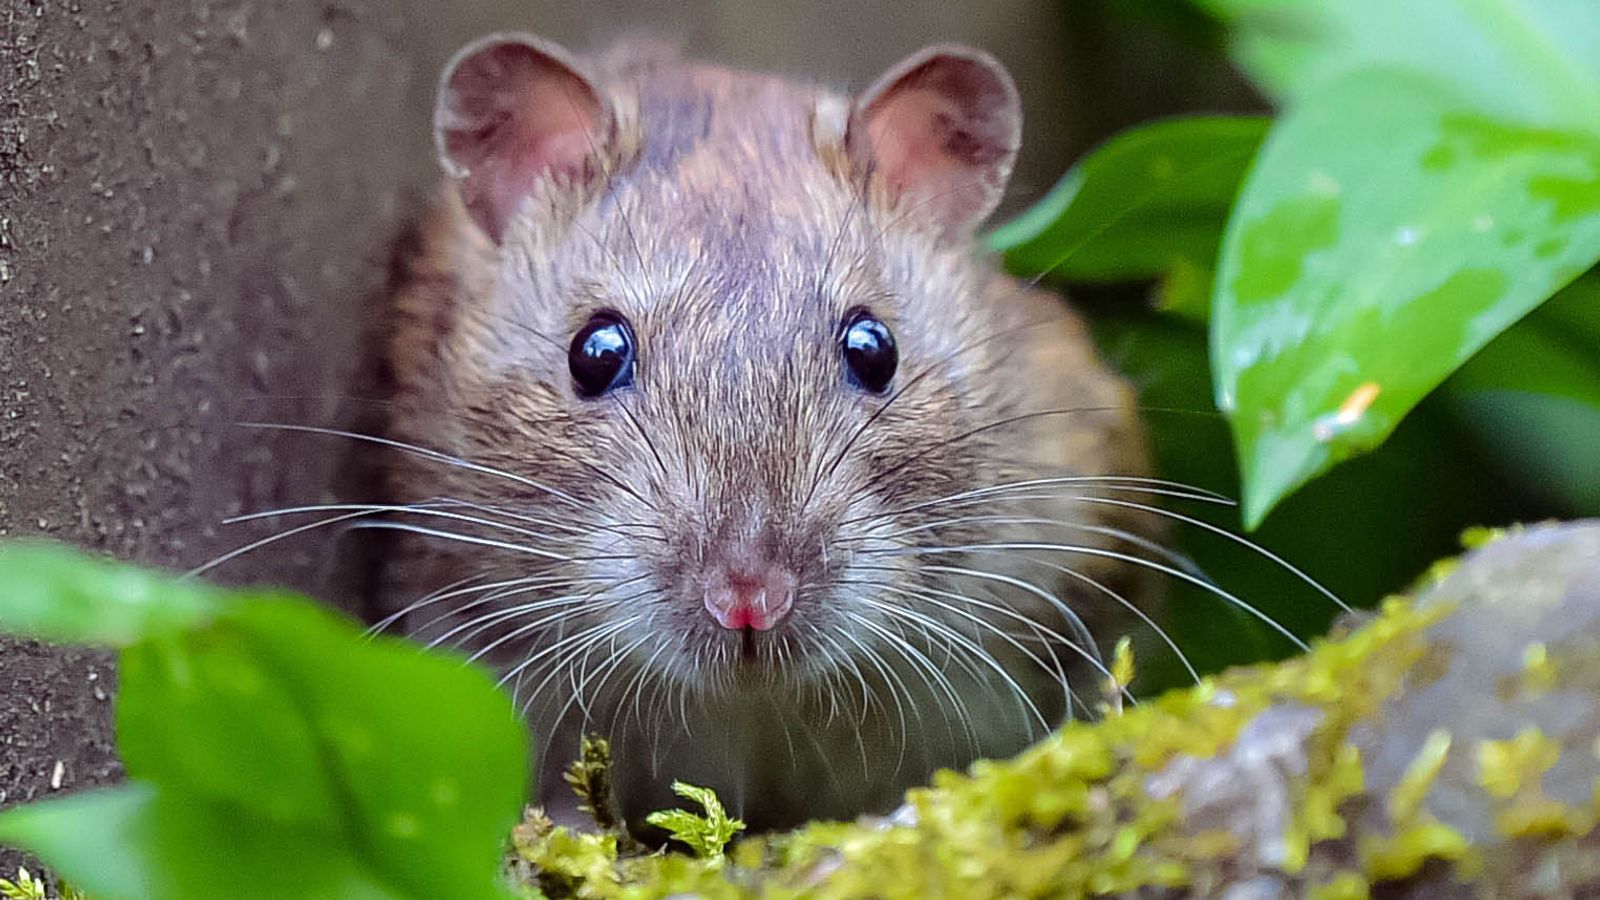 Animals causing record number of breakdowns - and rats are prime troublemaker